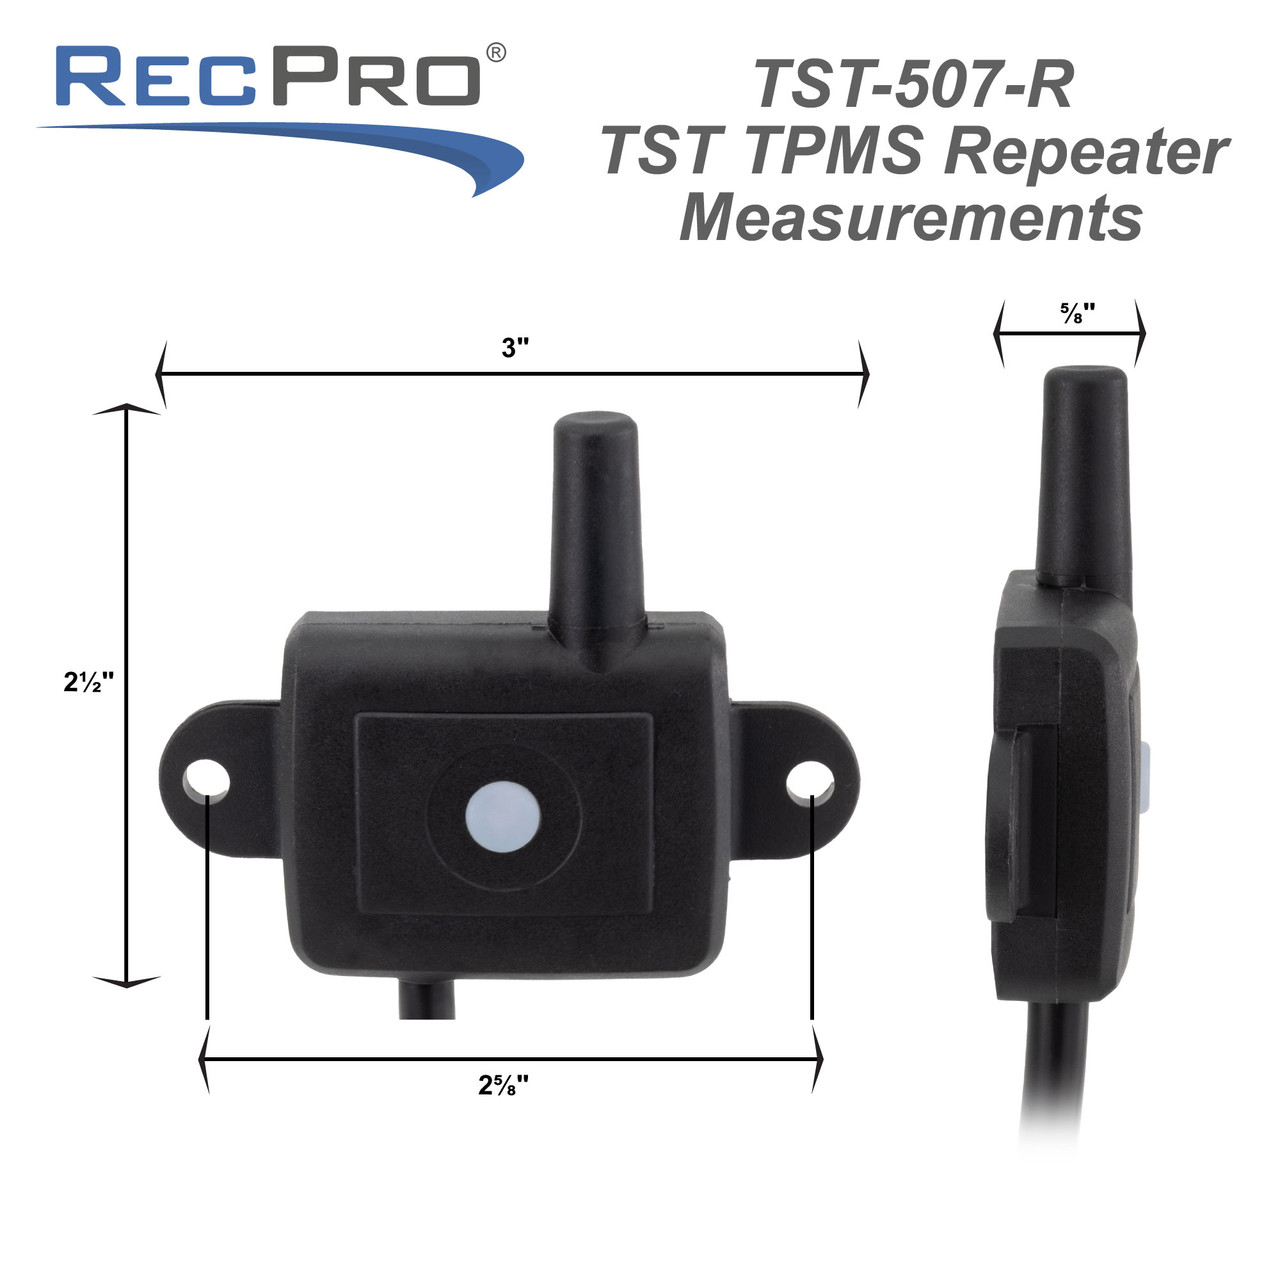 https://cdn11.bigcommerce.com/s-kwuh809851/images/stencil/1280x1280/products/3074/28898/RP-507-R-TST-TPMS-Repeater-Measurements__02752.1657548685.jpg?c=2&imbypass=on